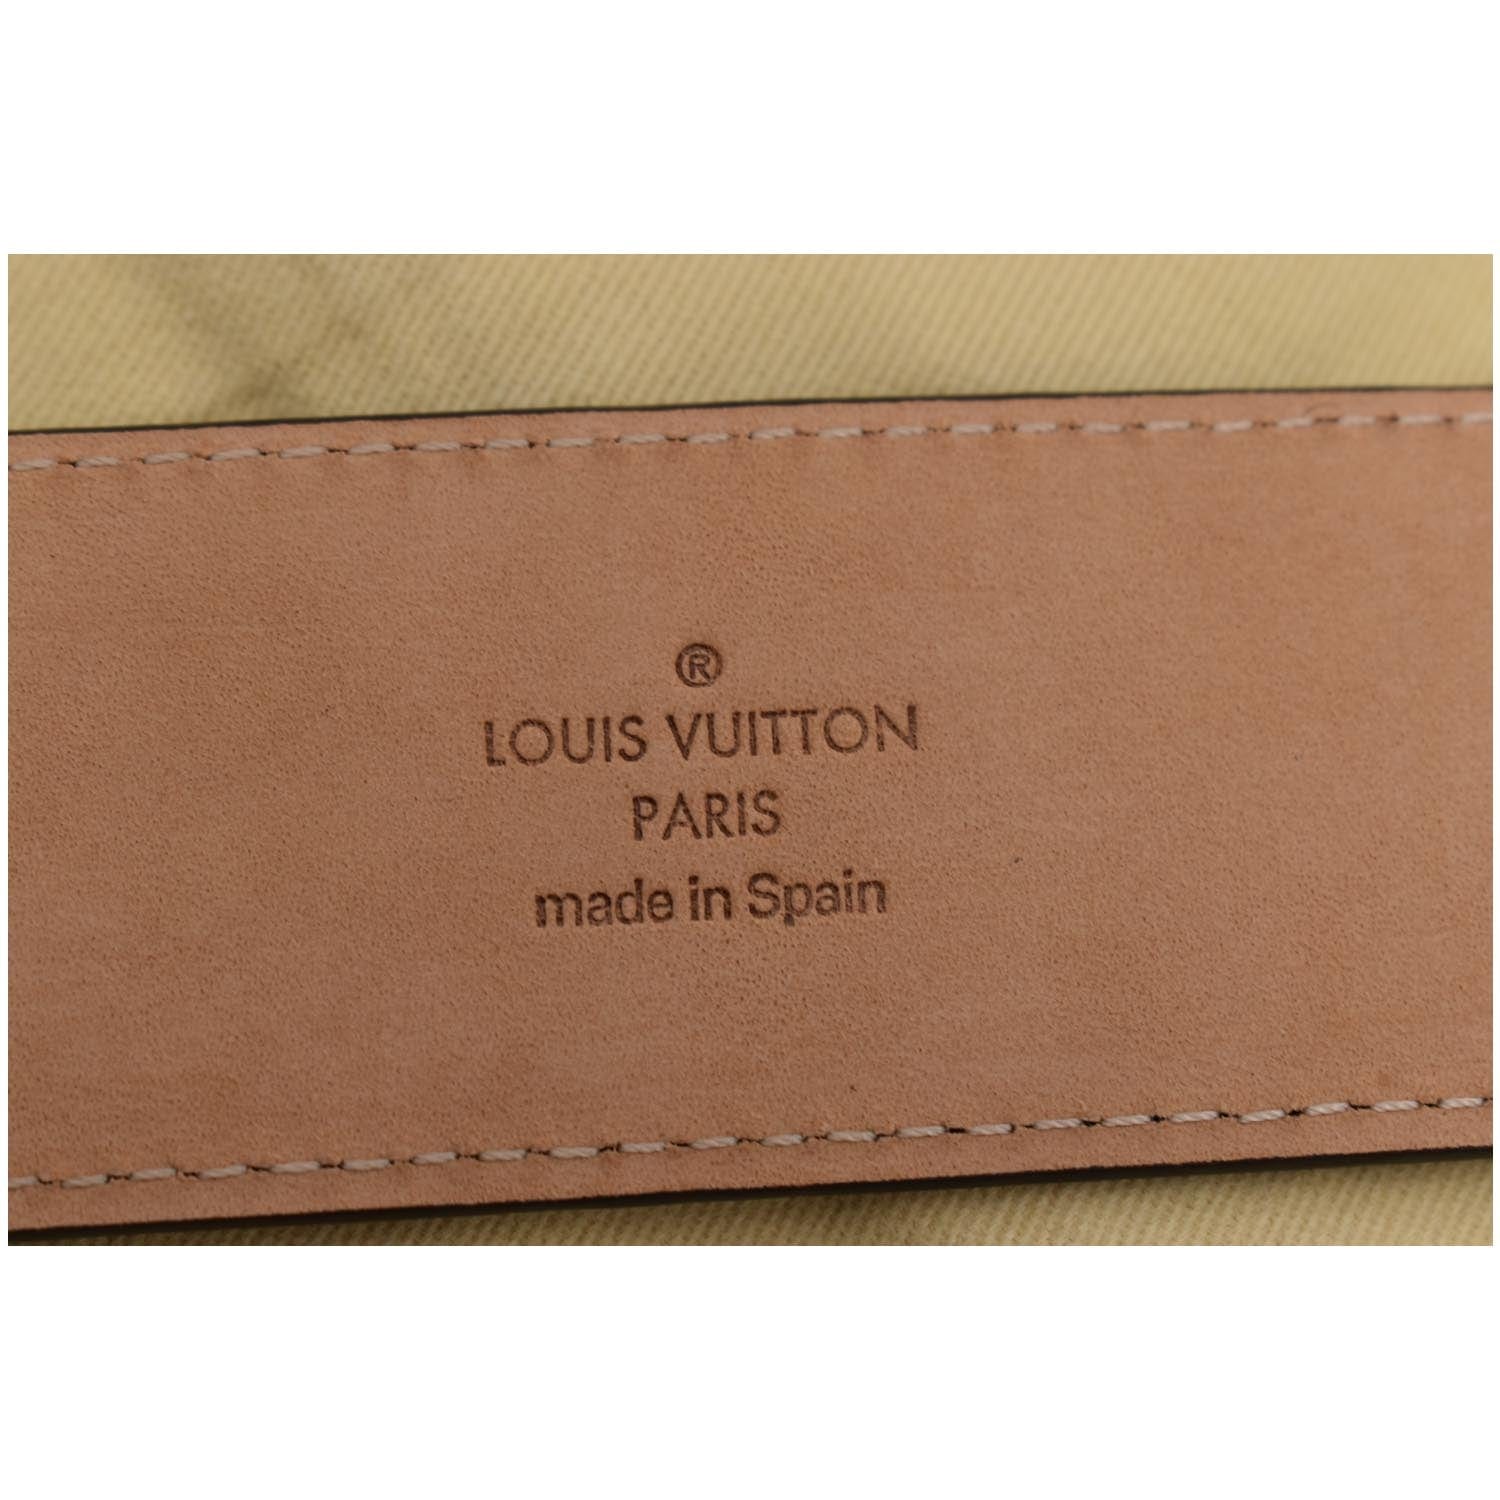 Where Are Real Lv Belts Made